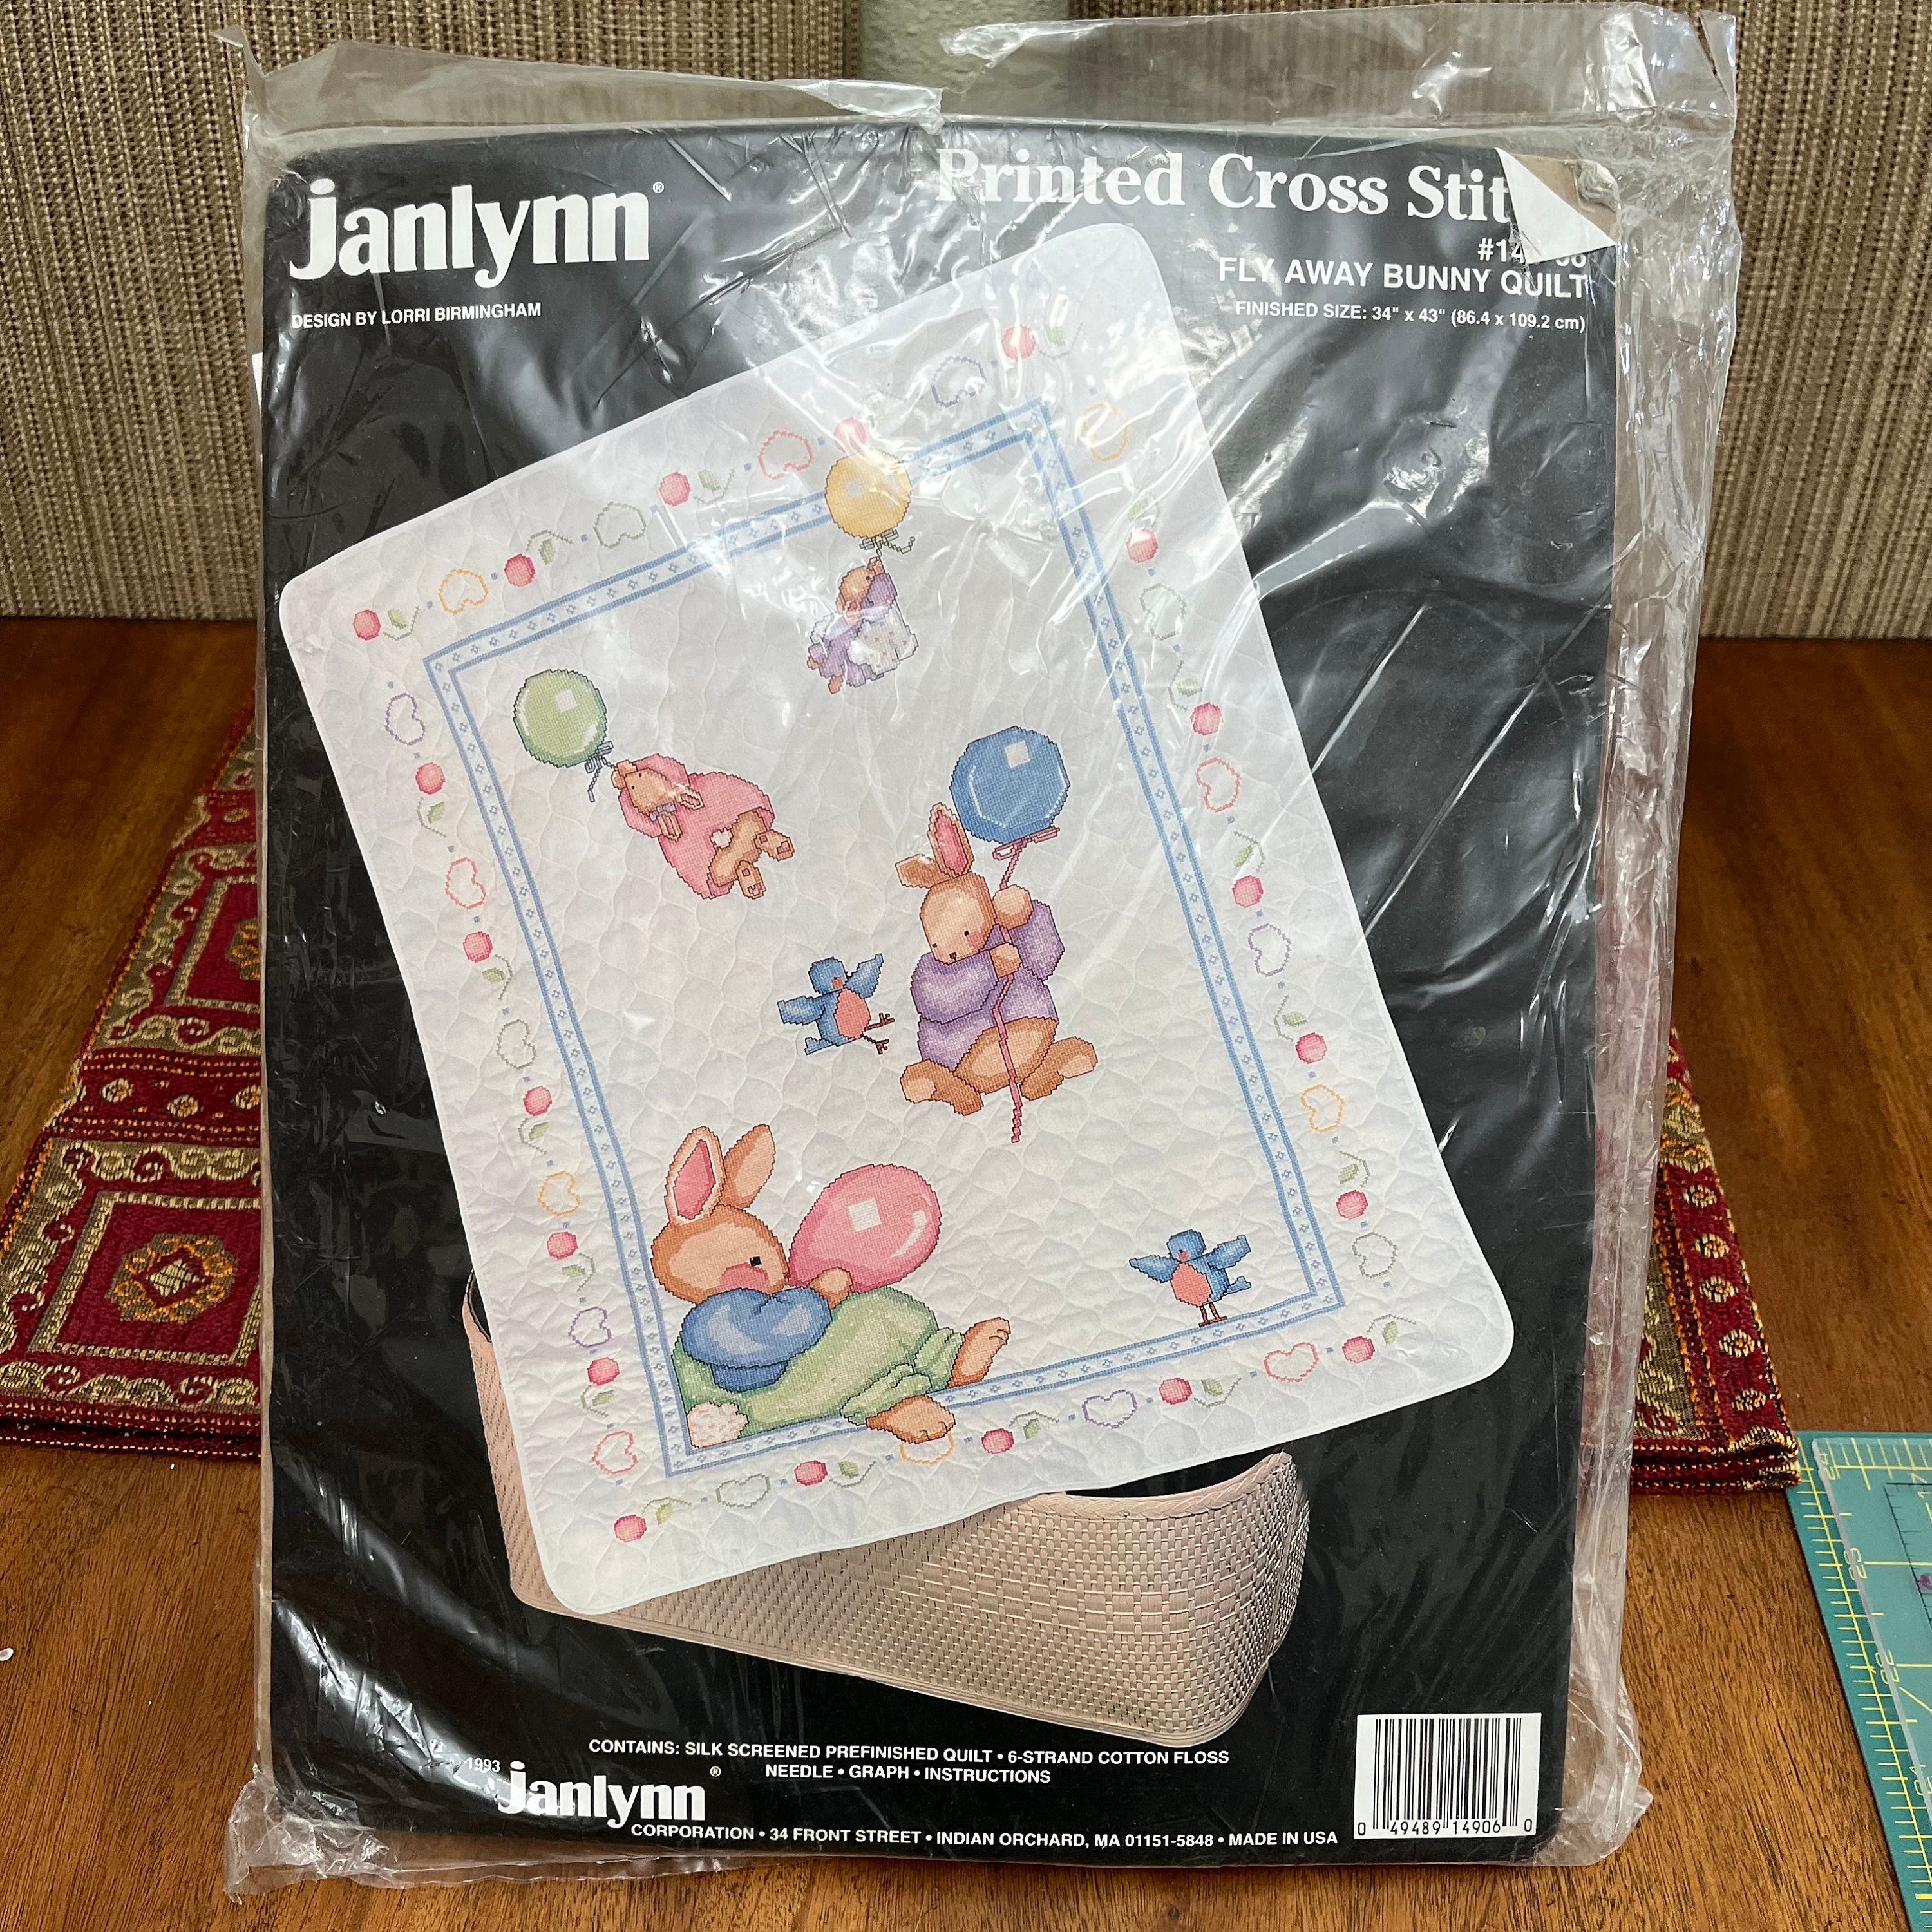 VINTAGE Janlynn Fly Away Bunny Crib Cover Baby Quilt Stamped Cross